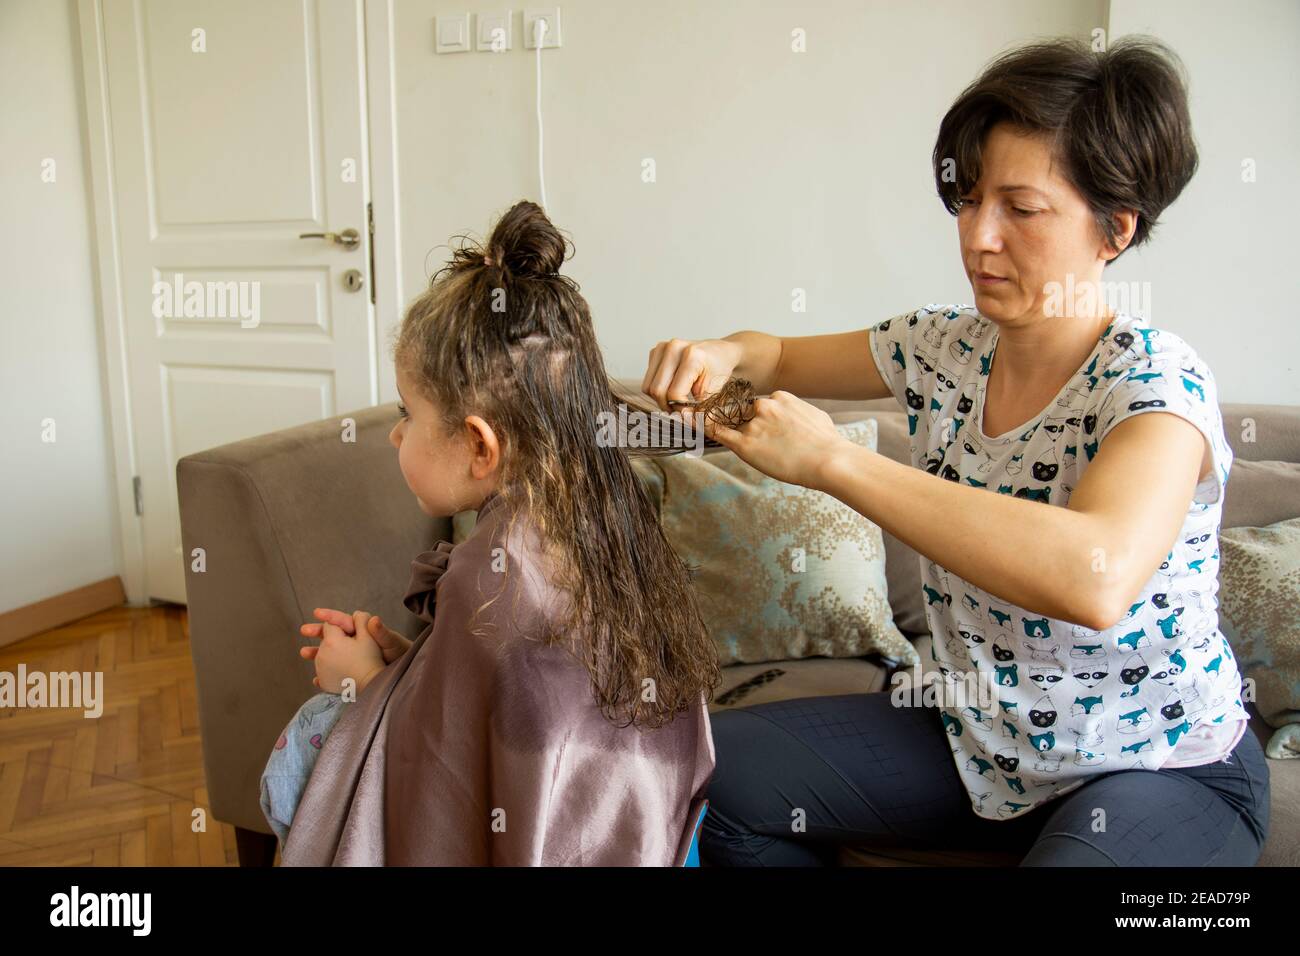 young woman is cutting her daughter's hair at home during the pandemic. stay at home. Stock Photo